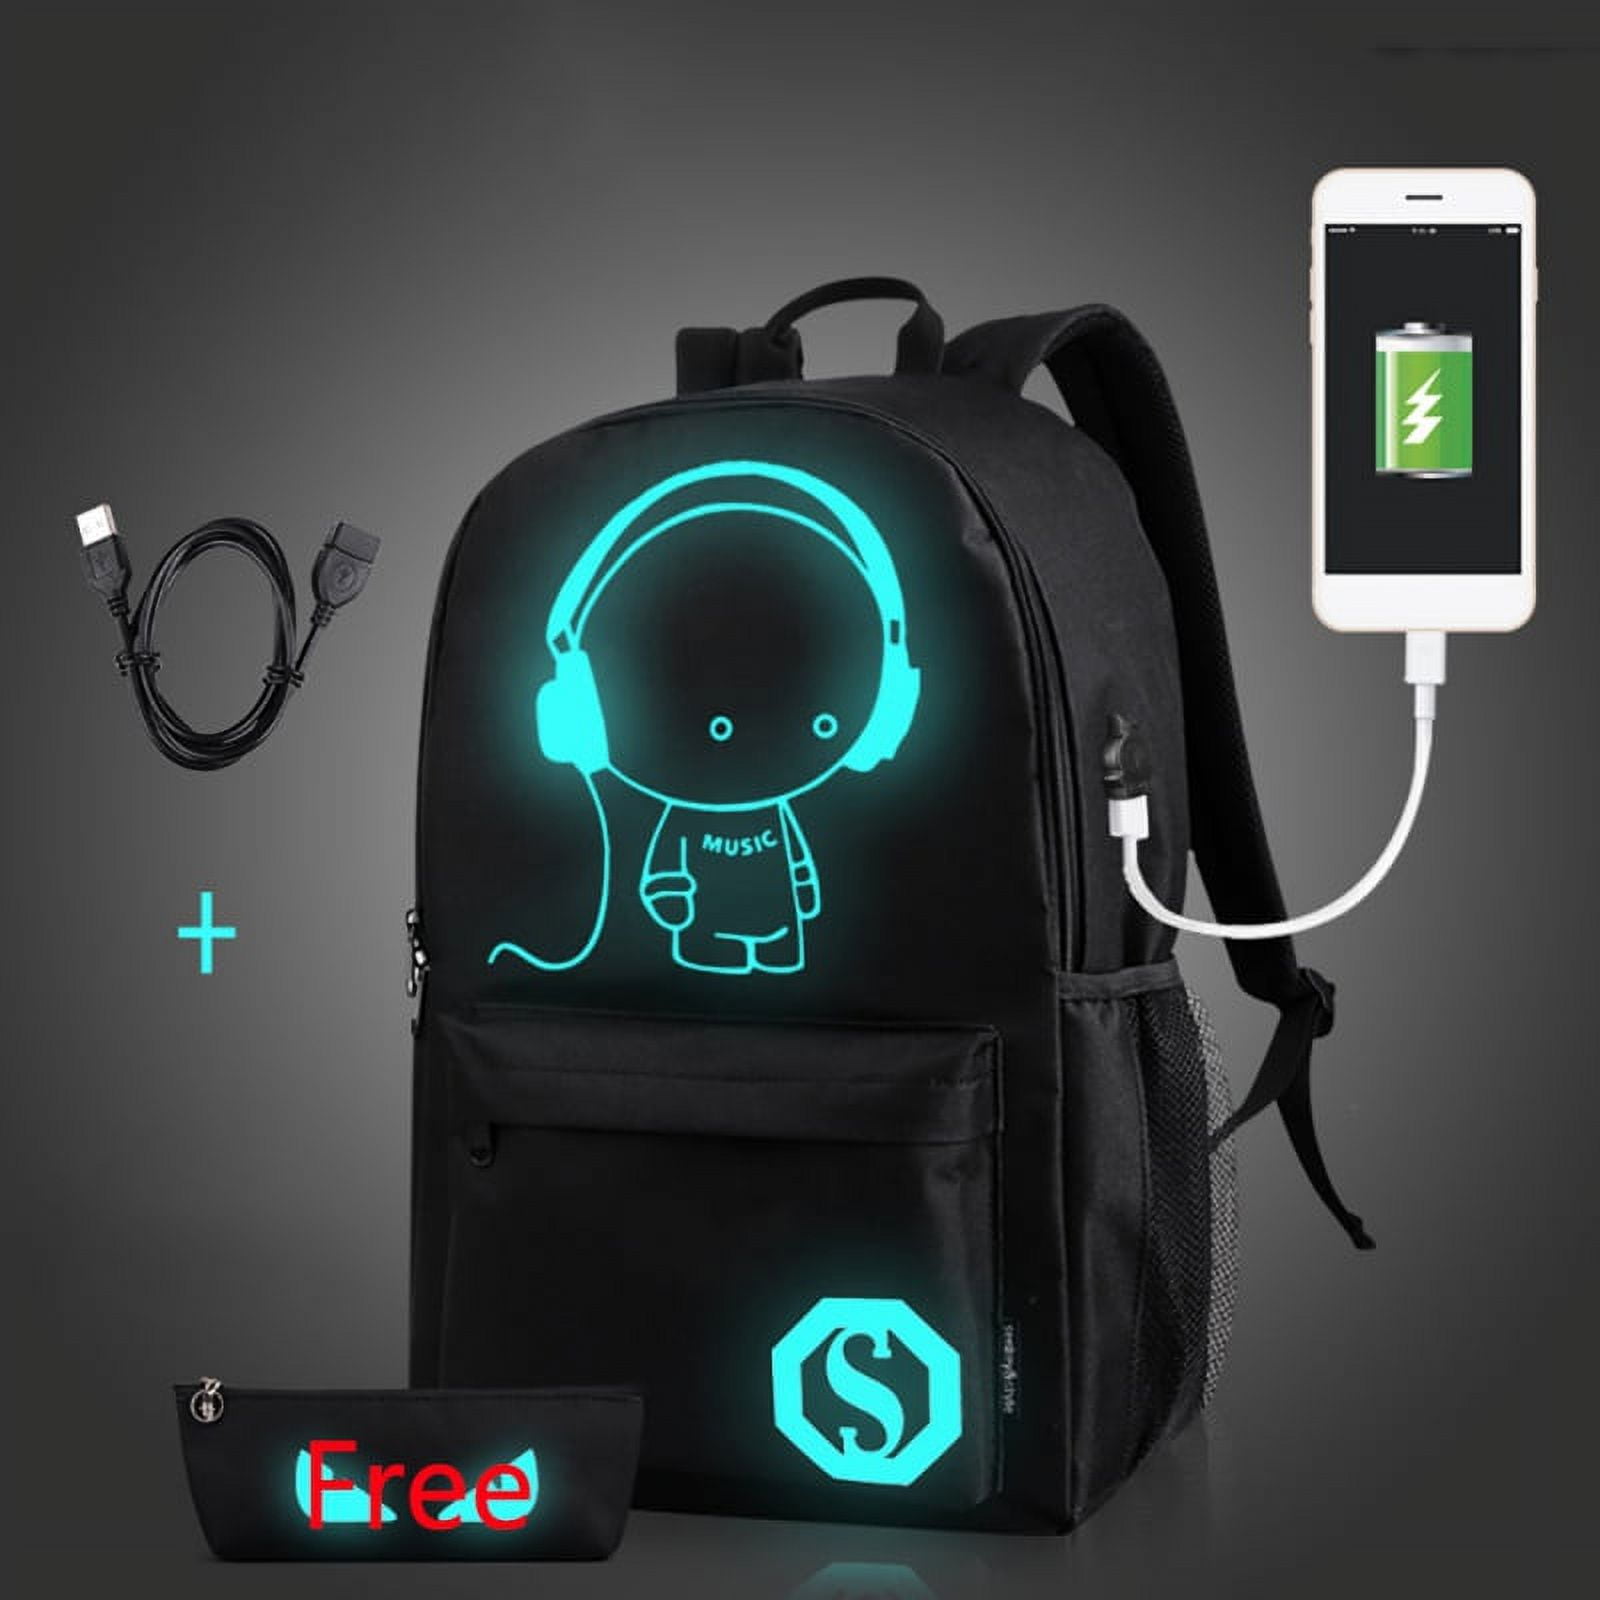 Luminous Glow In Dark Cool Boys School Backpack, Black Color, Large Size,  11.5(L) x 6.7(W) x 18.9(H) inches (Powerbank Not Included)